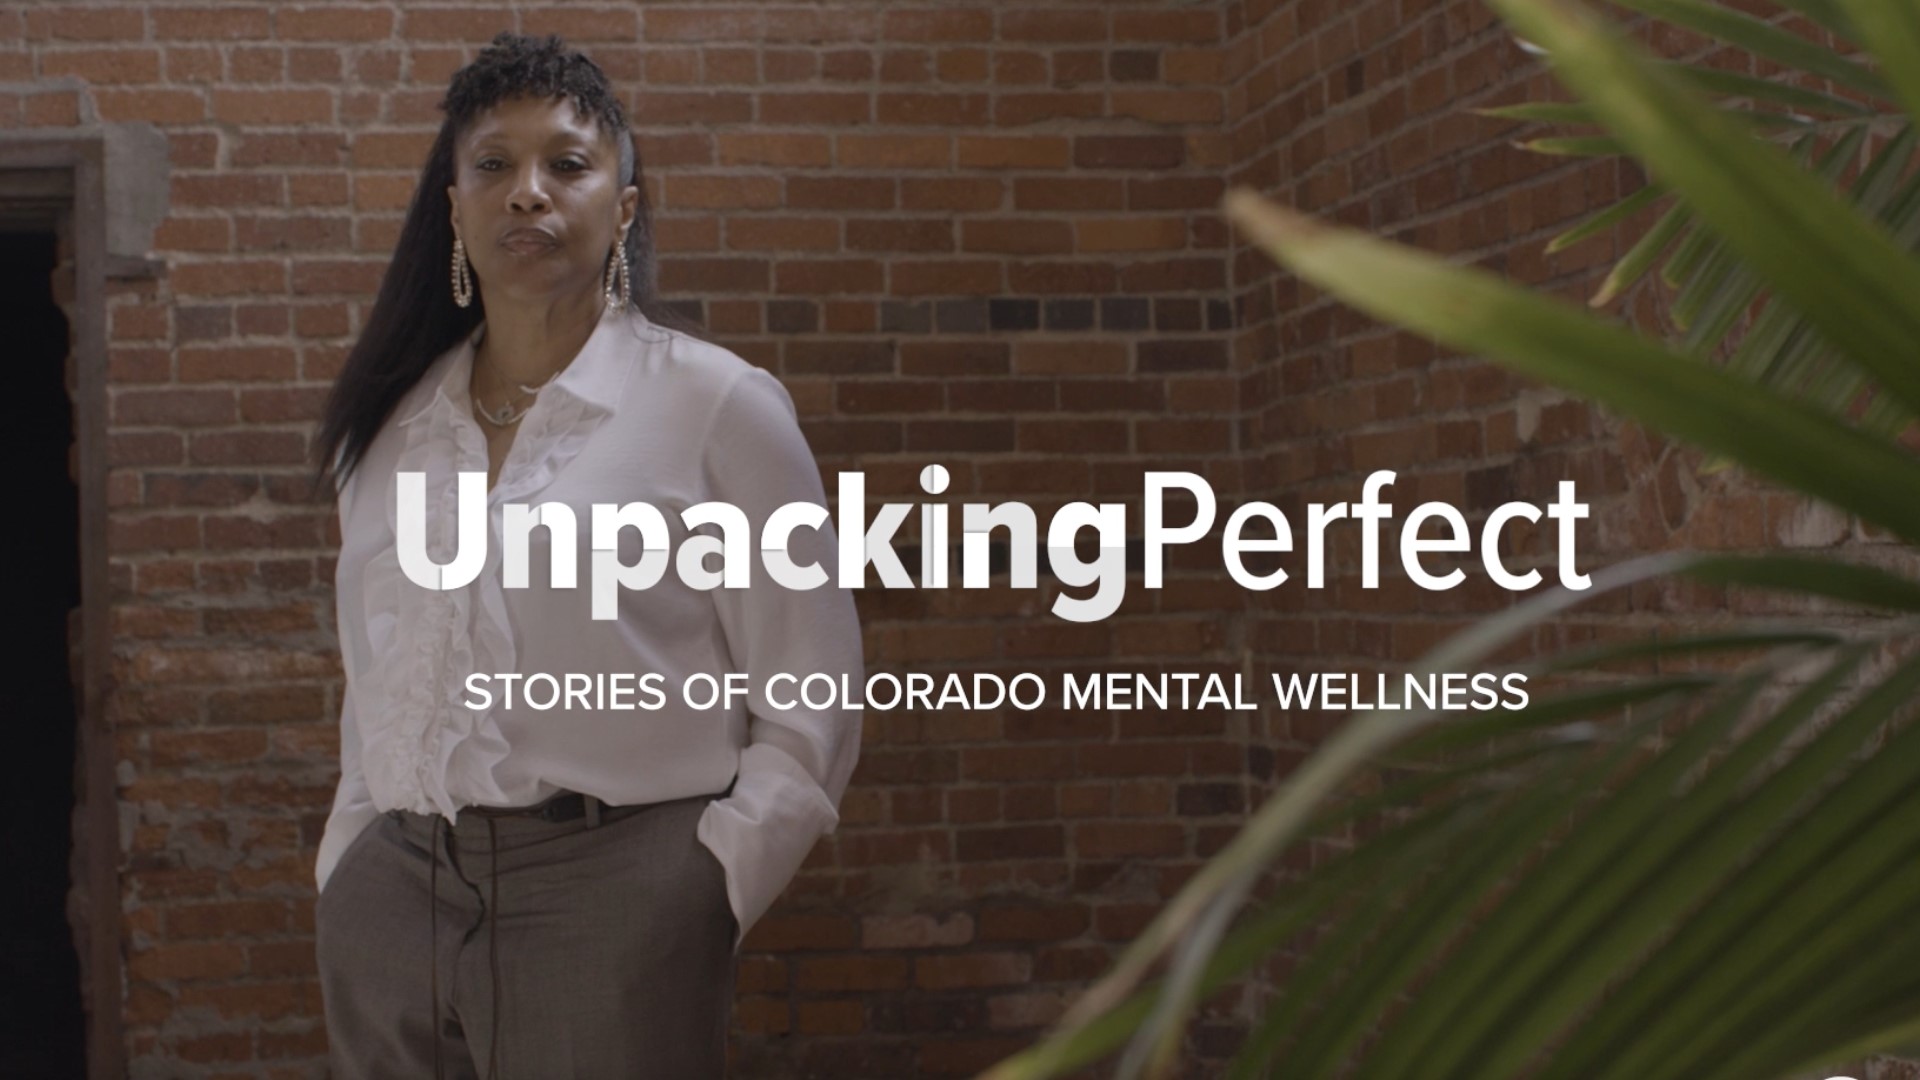 Stacie recently sat down with 9NEWS and Unpacking Perfect to share her story of mental wellness, and how she has pushed aside the ideals of perfection.